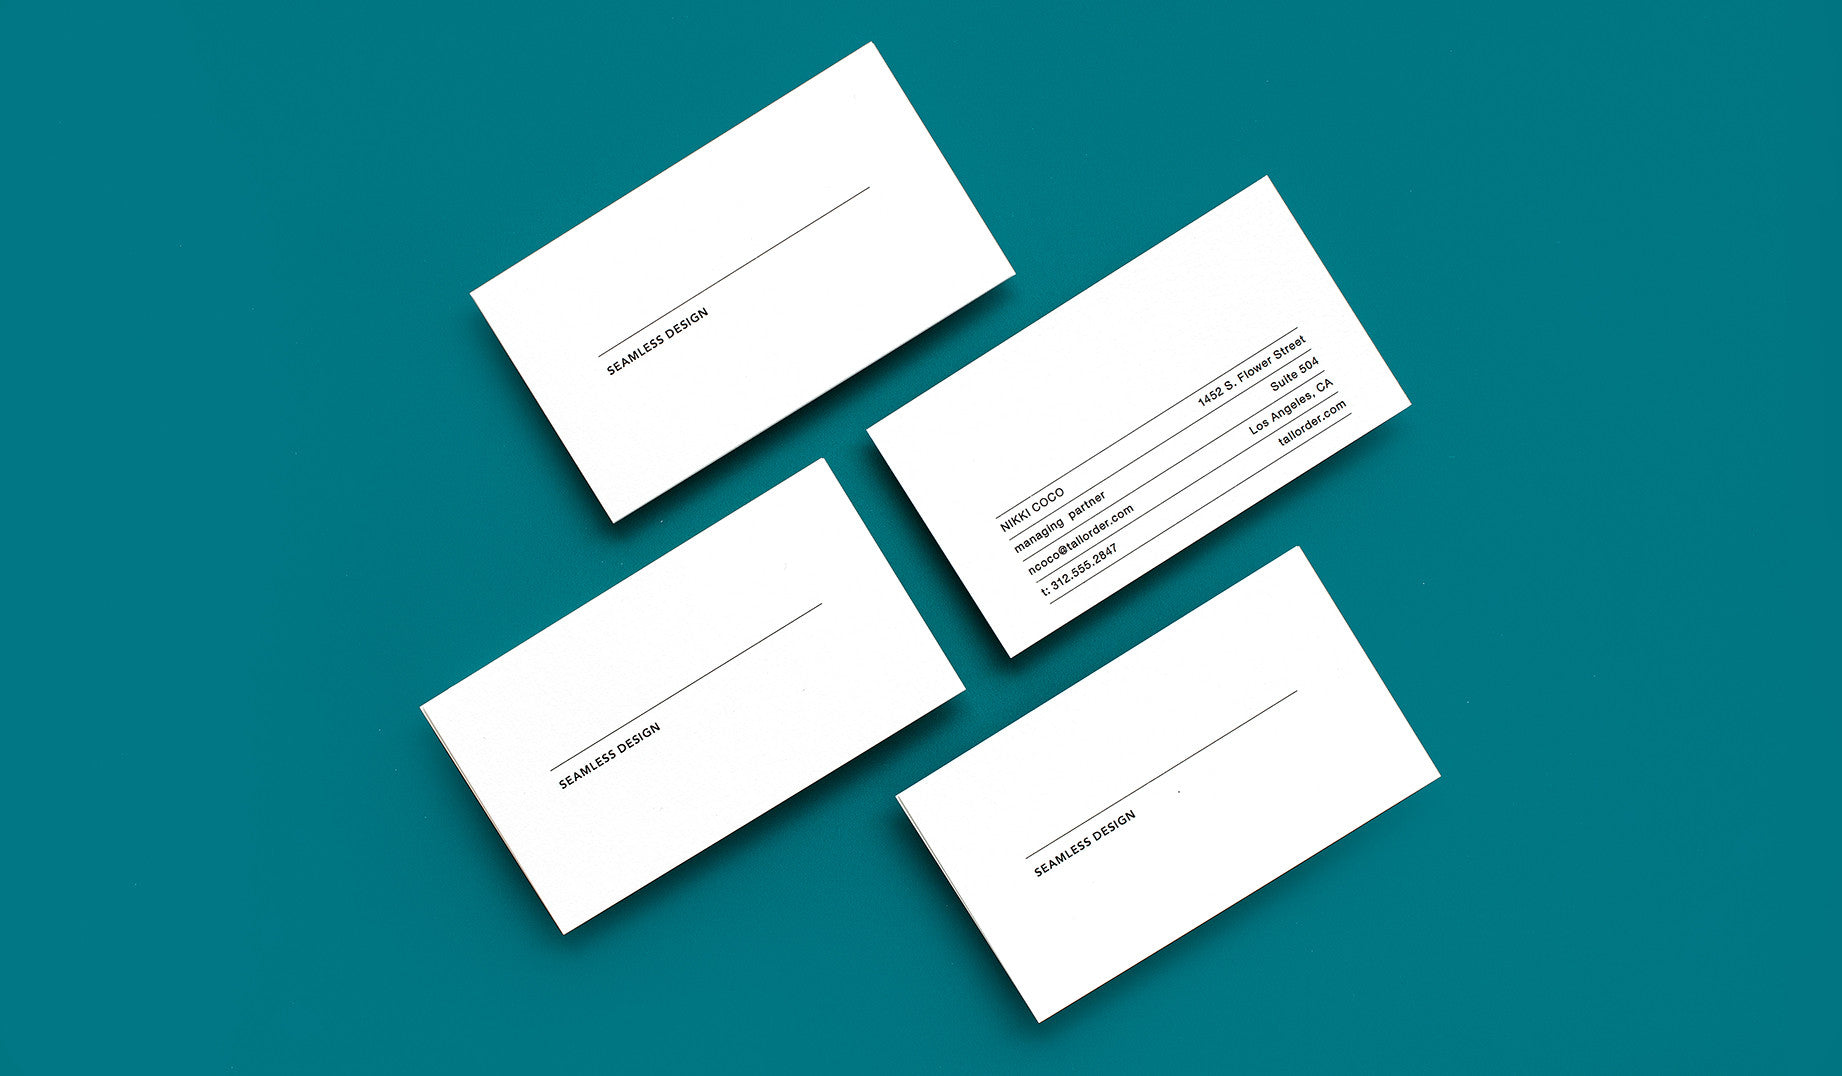 Choose from four formats for your business cards, the Traditional 2 x 3.5 inch size, our signature Tall Card at 3.3125 x 2.25 inches, the Square Card at 2.5 x 2.5 inches, or the original business card format that dates back to the 1800's -- the Calling Card, which measures in at 3 x 3.75 inches.